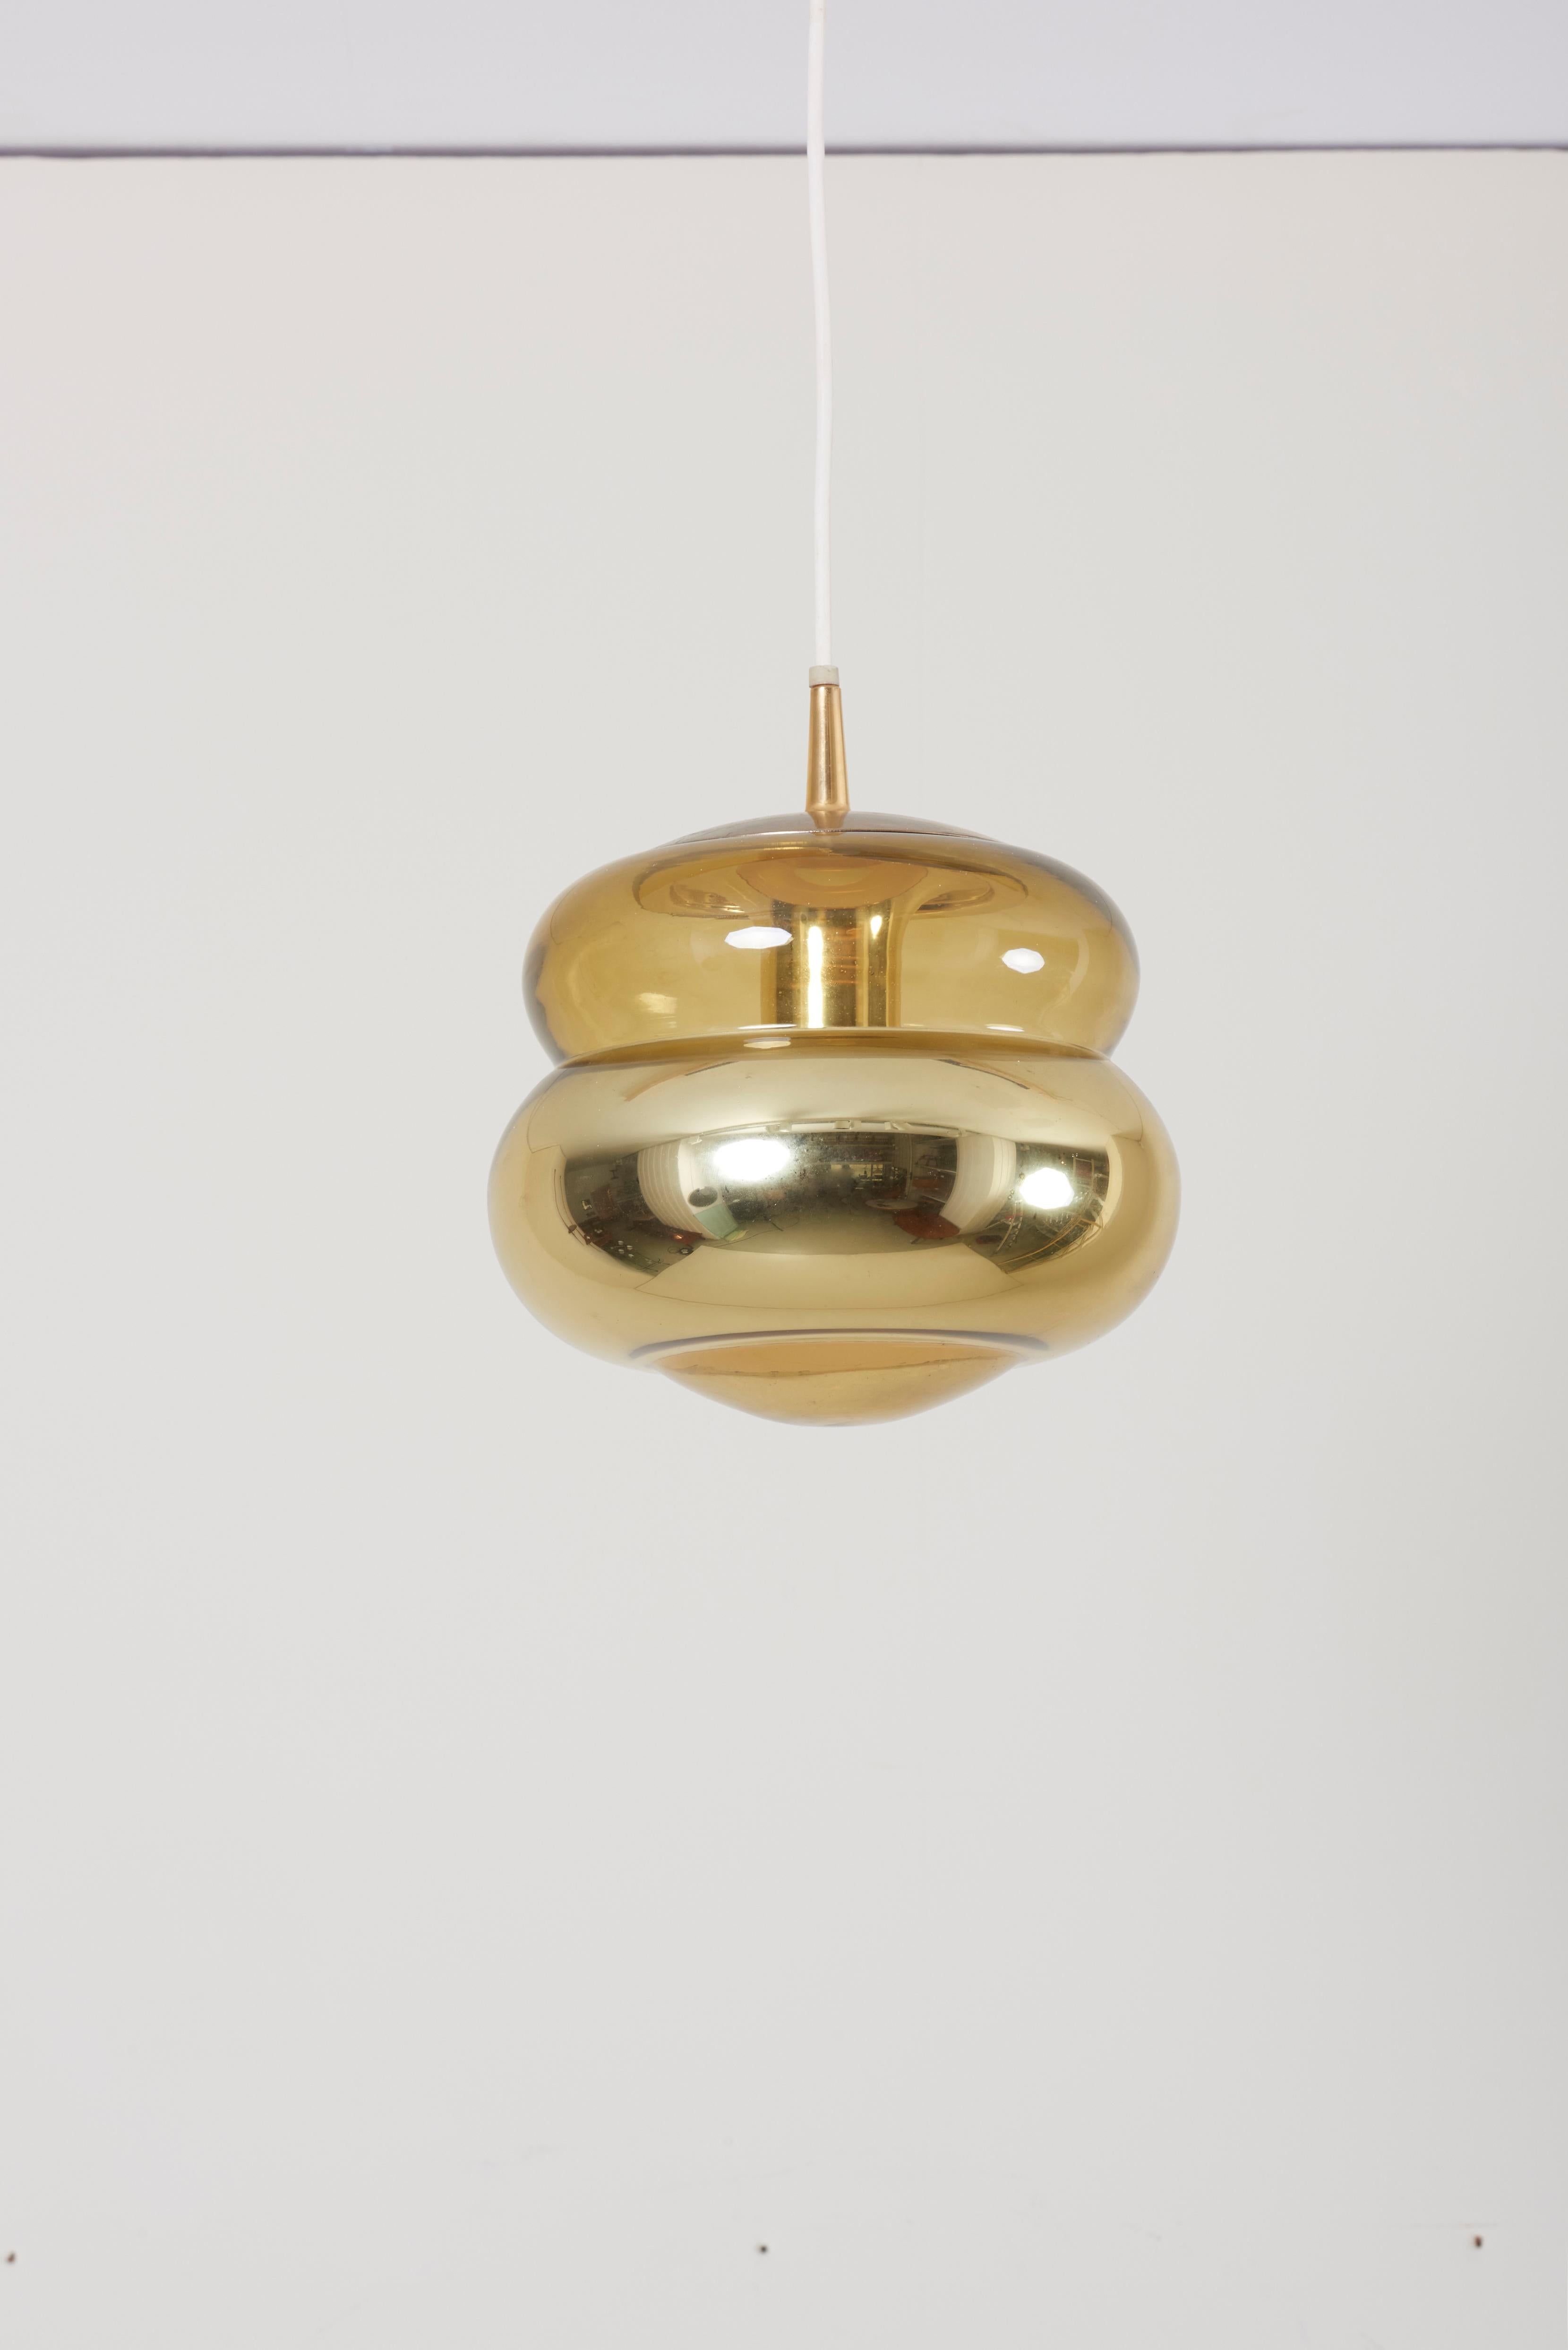 Pendant lamp from the 1970s in golden glass.
Some of gold inside is going off the glass but it still a very nice lamp and is not visible from all sides.
1 x E27 / A bulb.

To be on the safe side, the lamp should be checked locally by a specialist